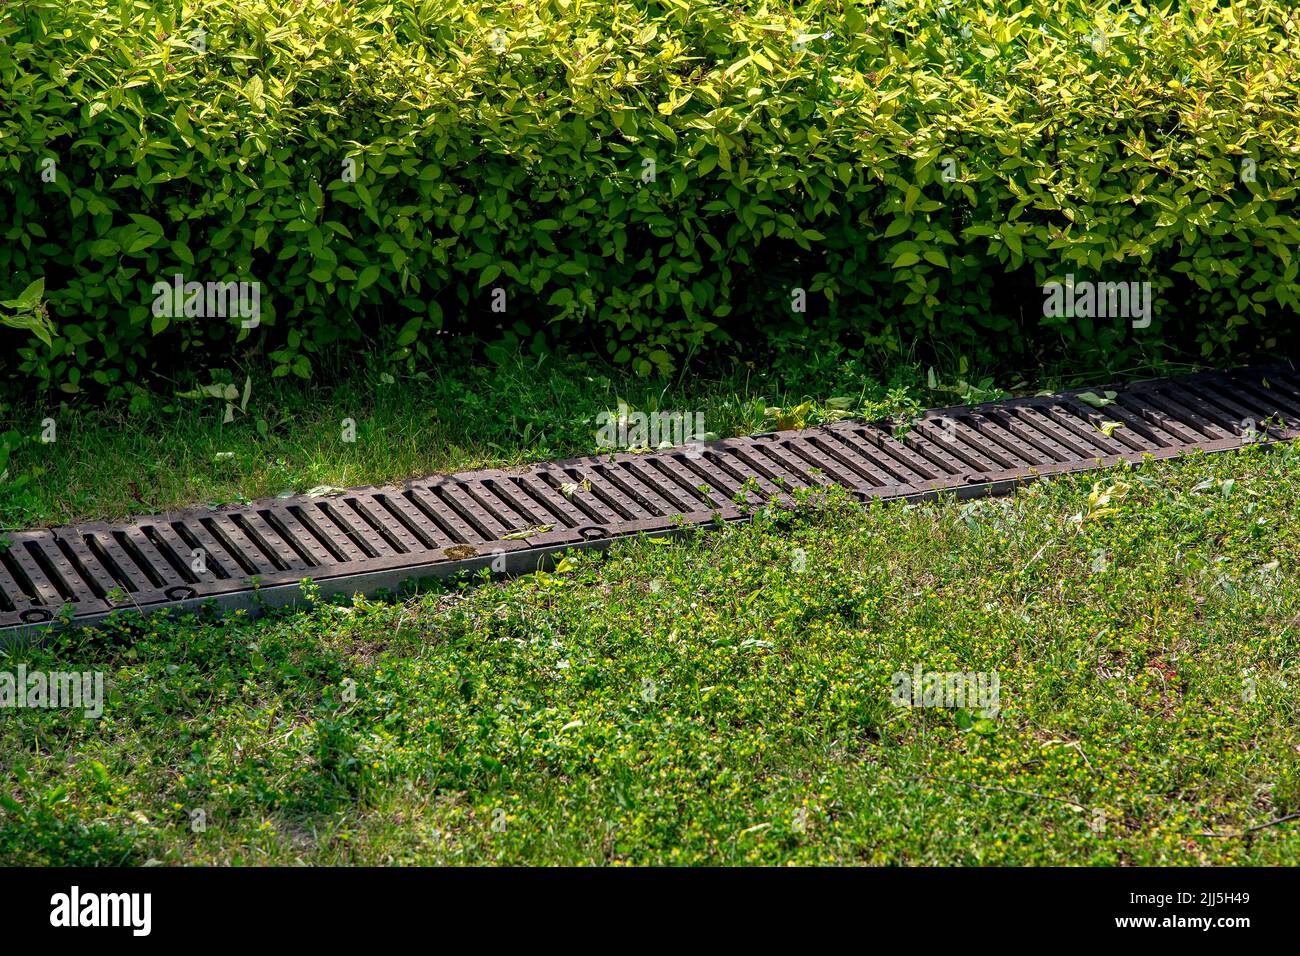 rusty grate drainage system on lawn with green grass and foliage bushes in the backyard garden, rainwater drainage lattice in the park among the decid Stock Photo